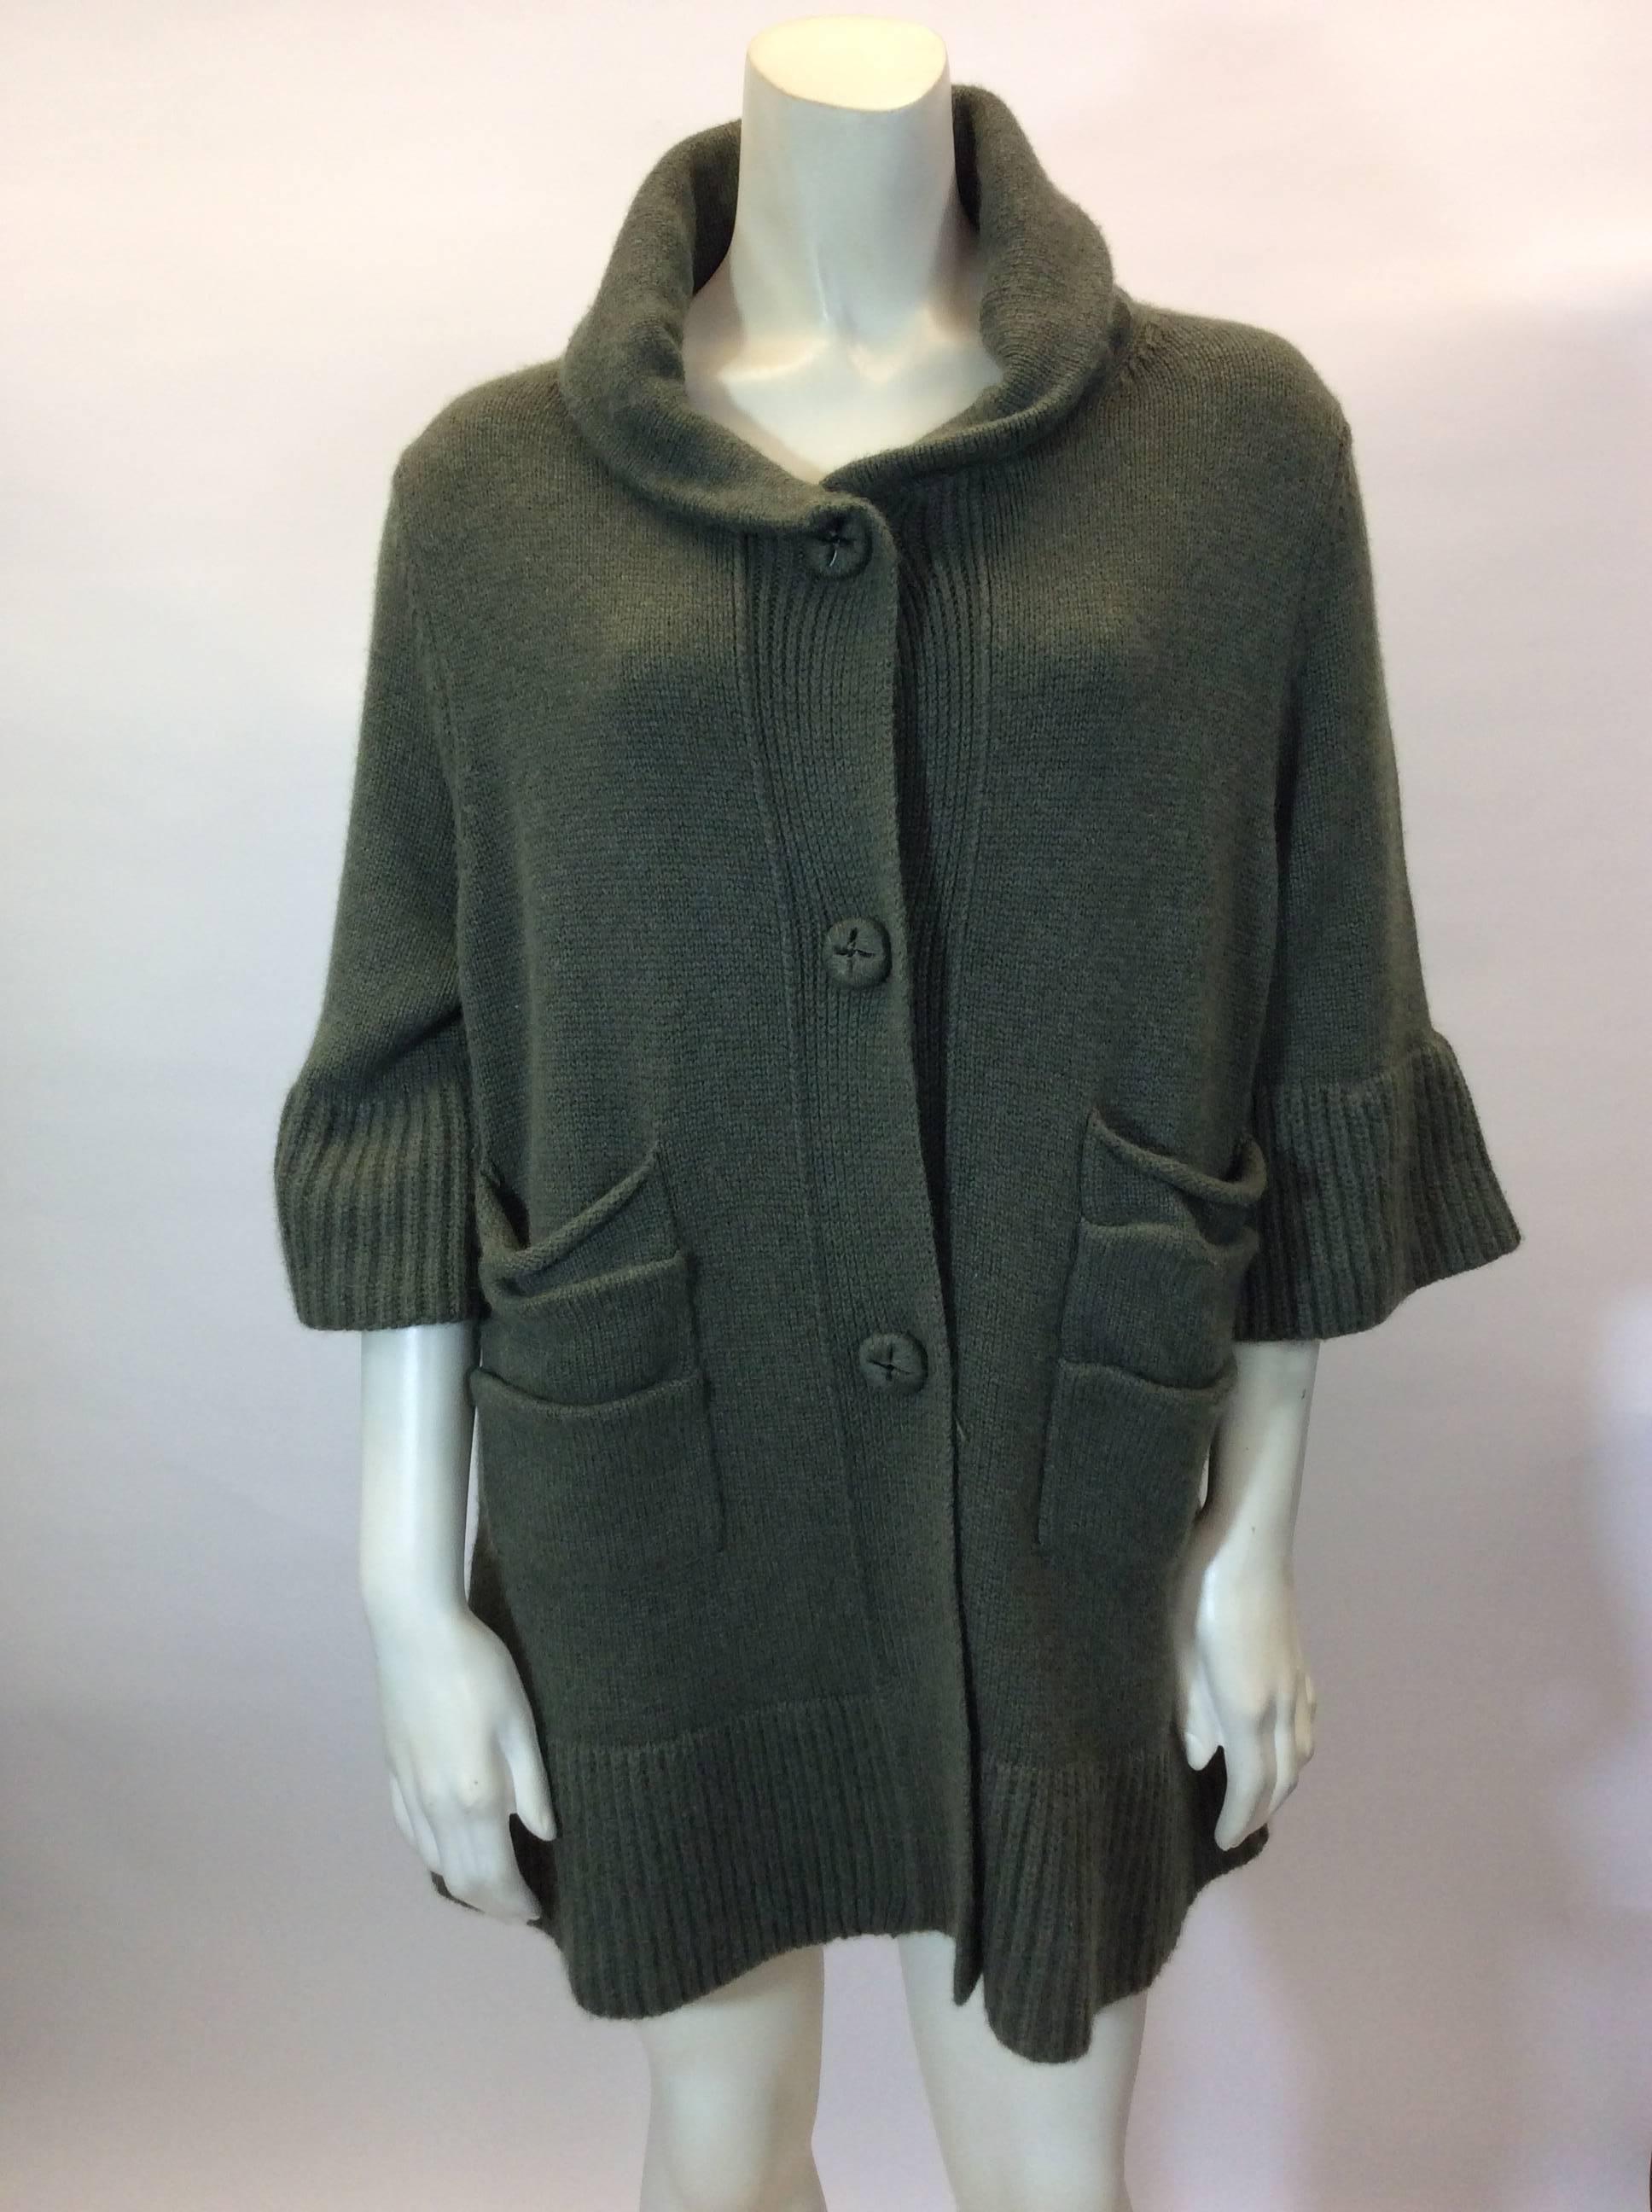 Olive Cashmere Cardigan with Detachable Sleeves
Three button front closure
4 button closure on detachable sleeves
Two front hip pockets
Size Large
100% Cashmere